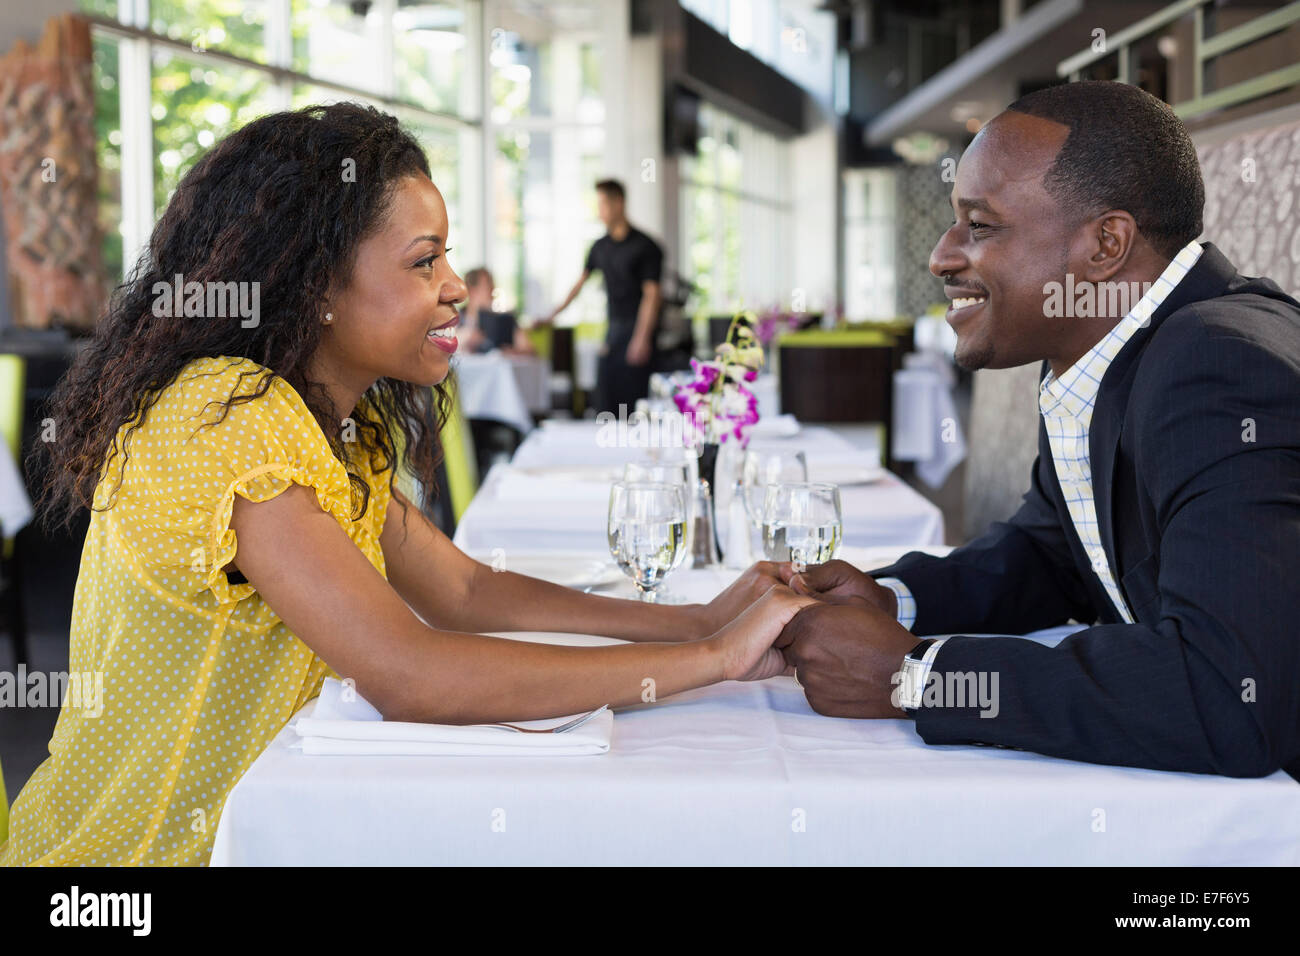 African American couple holding hands in restaurant Banque D'Images